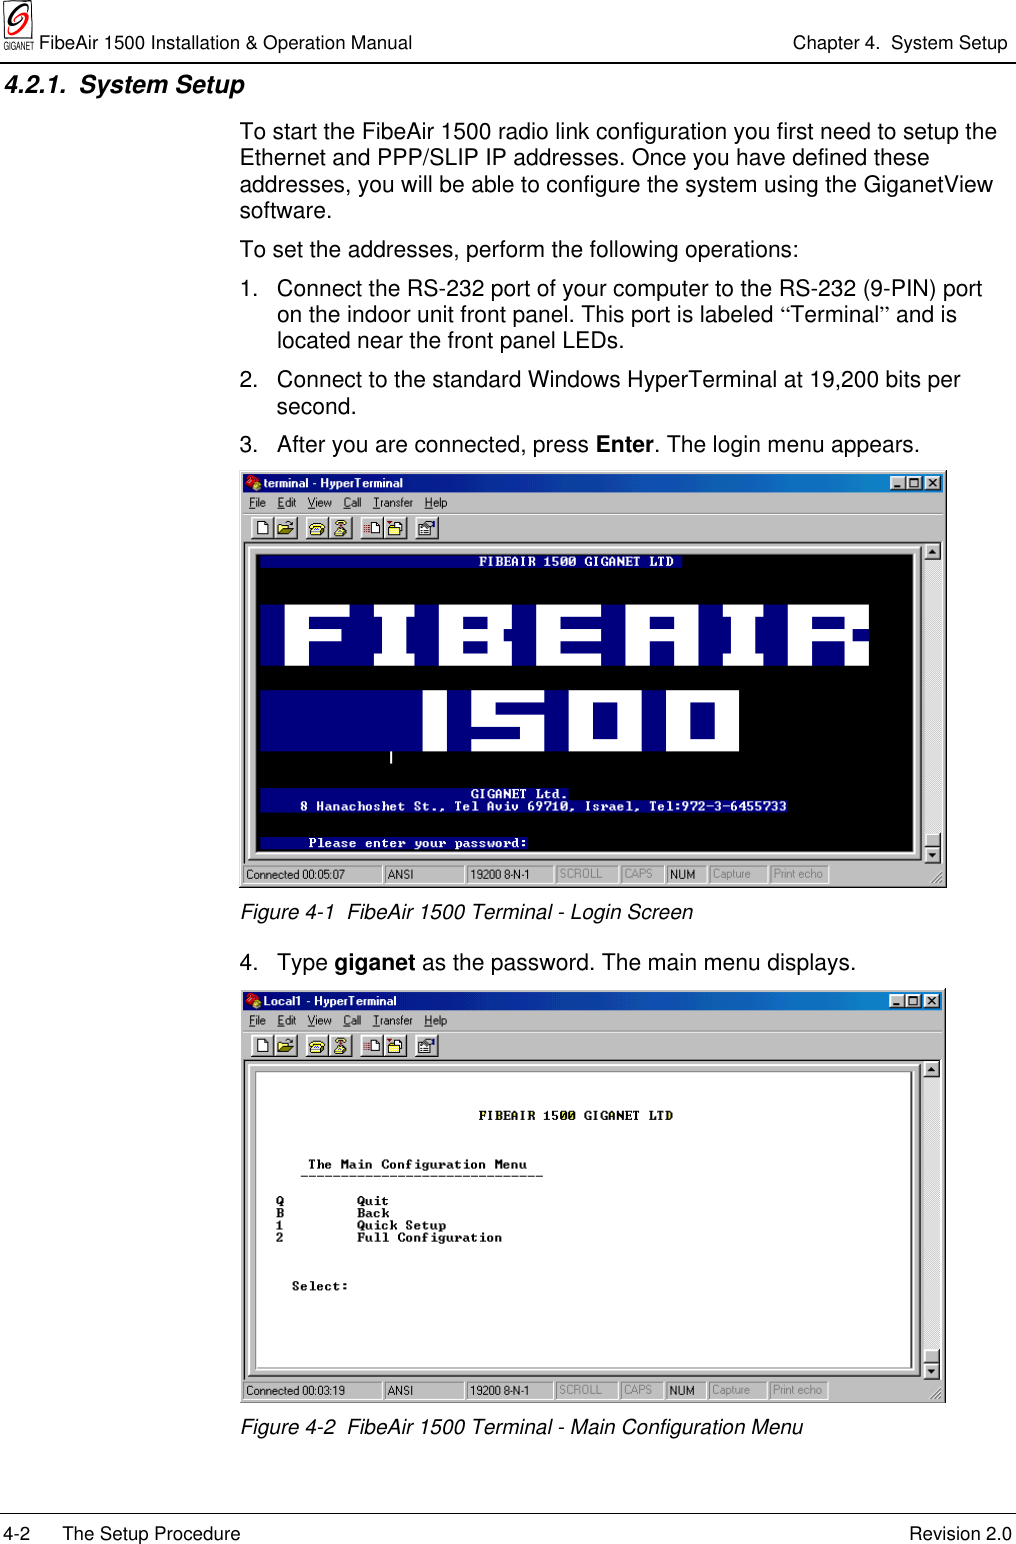  FibeAir 1500 Installation &amp; Operation Manual Chapter 4.  System Setup4-2 The Setup Procedure Revision 2.04.2.1. System SetupTo start the FibeAir 1500 radio link configuration you first need to setup theEthernet and PPP/SLIP IP addresses. Once you have defined theseaddresses, you will be able to configure the system using the GiganetViewsoftware.To set the addresses, perform the following operations:1.  Connect the RS-232 port of your computer to the RS-232 (9-PIN) porton the indoor unit front panel. This port is labeled “Terminal” and islocated near the front panel LEDs.2.  Connect to the standard Windows HyperTerminal at 19,200 bits persecond.3.  After you are connected, press Enter. The login menu appears.Figure 4-1  FibeAir 1500 Terminal - Login Screen4. Type giganet as the password. The main menu displays.Figure 4-2  FibeAir 1500 Terminal - Main Configuration Menu